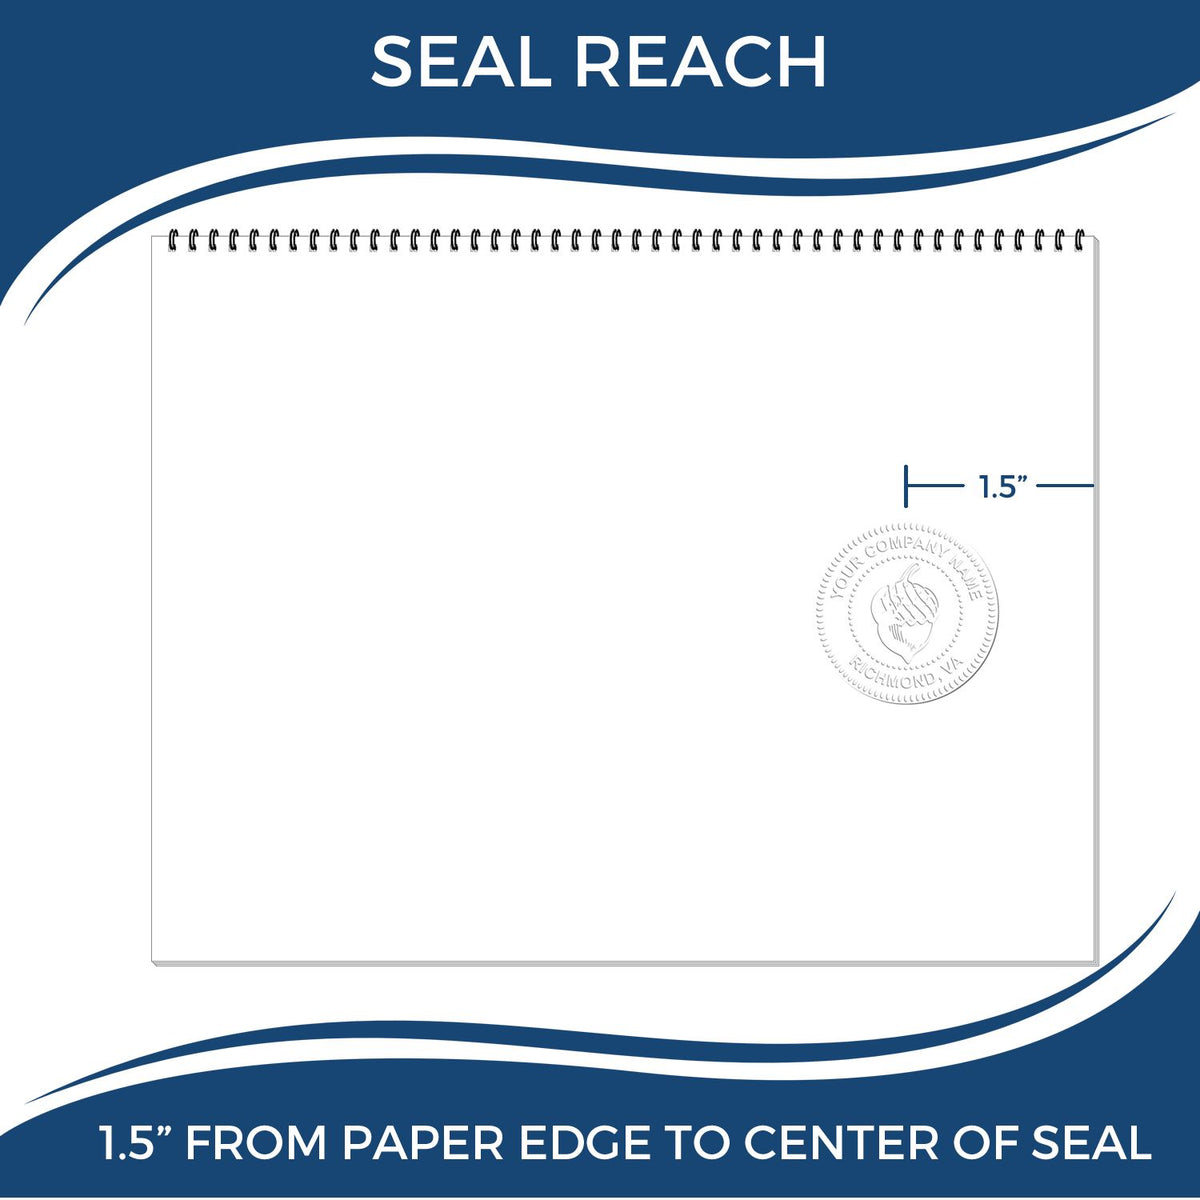 An infographic showing the seal reach which is represented by a ruler and a miniature seal image of the Hybrid Maine Geologist Seal